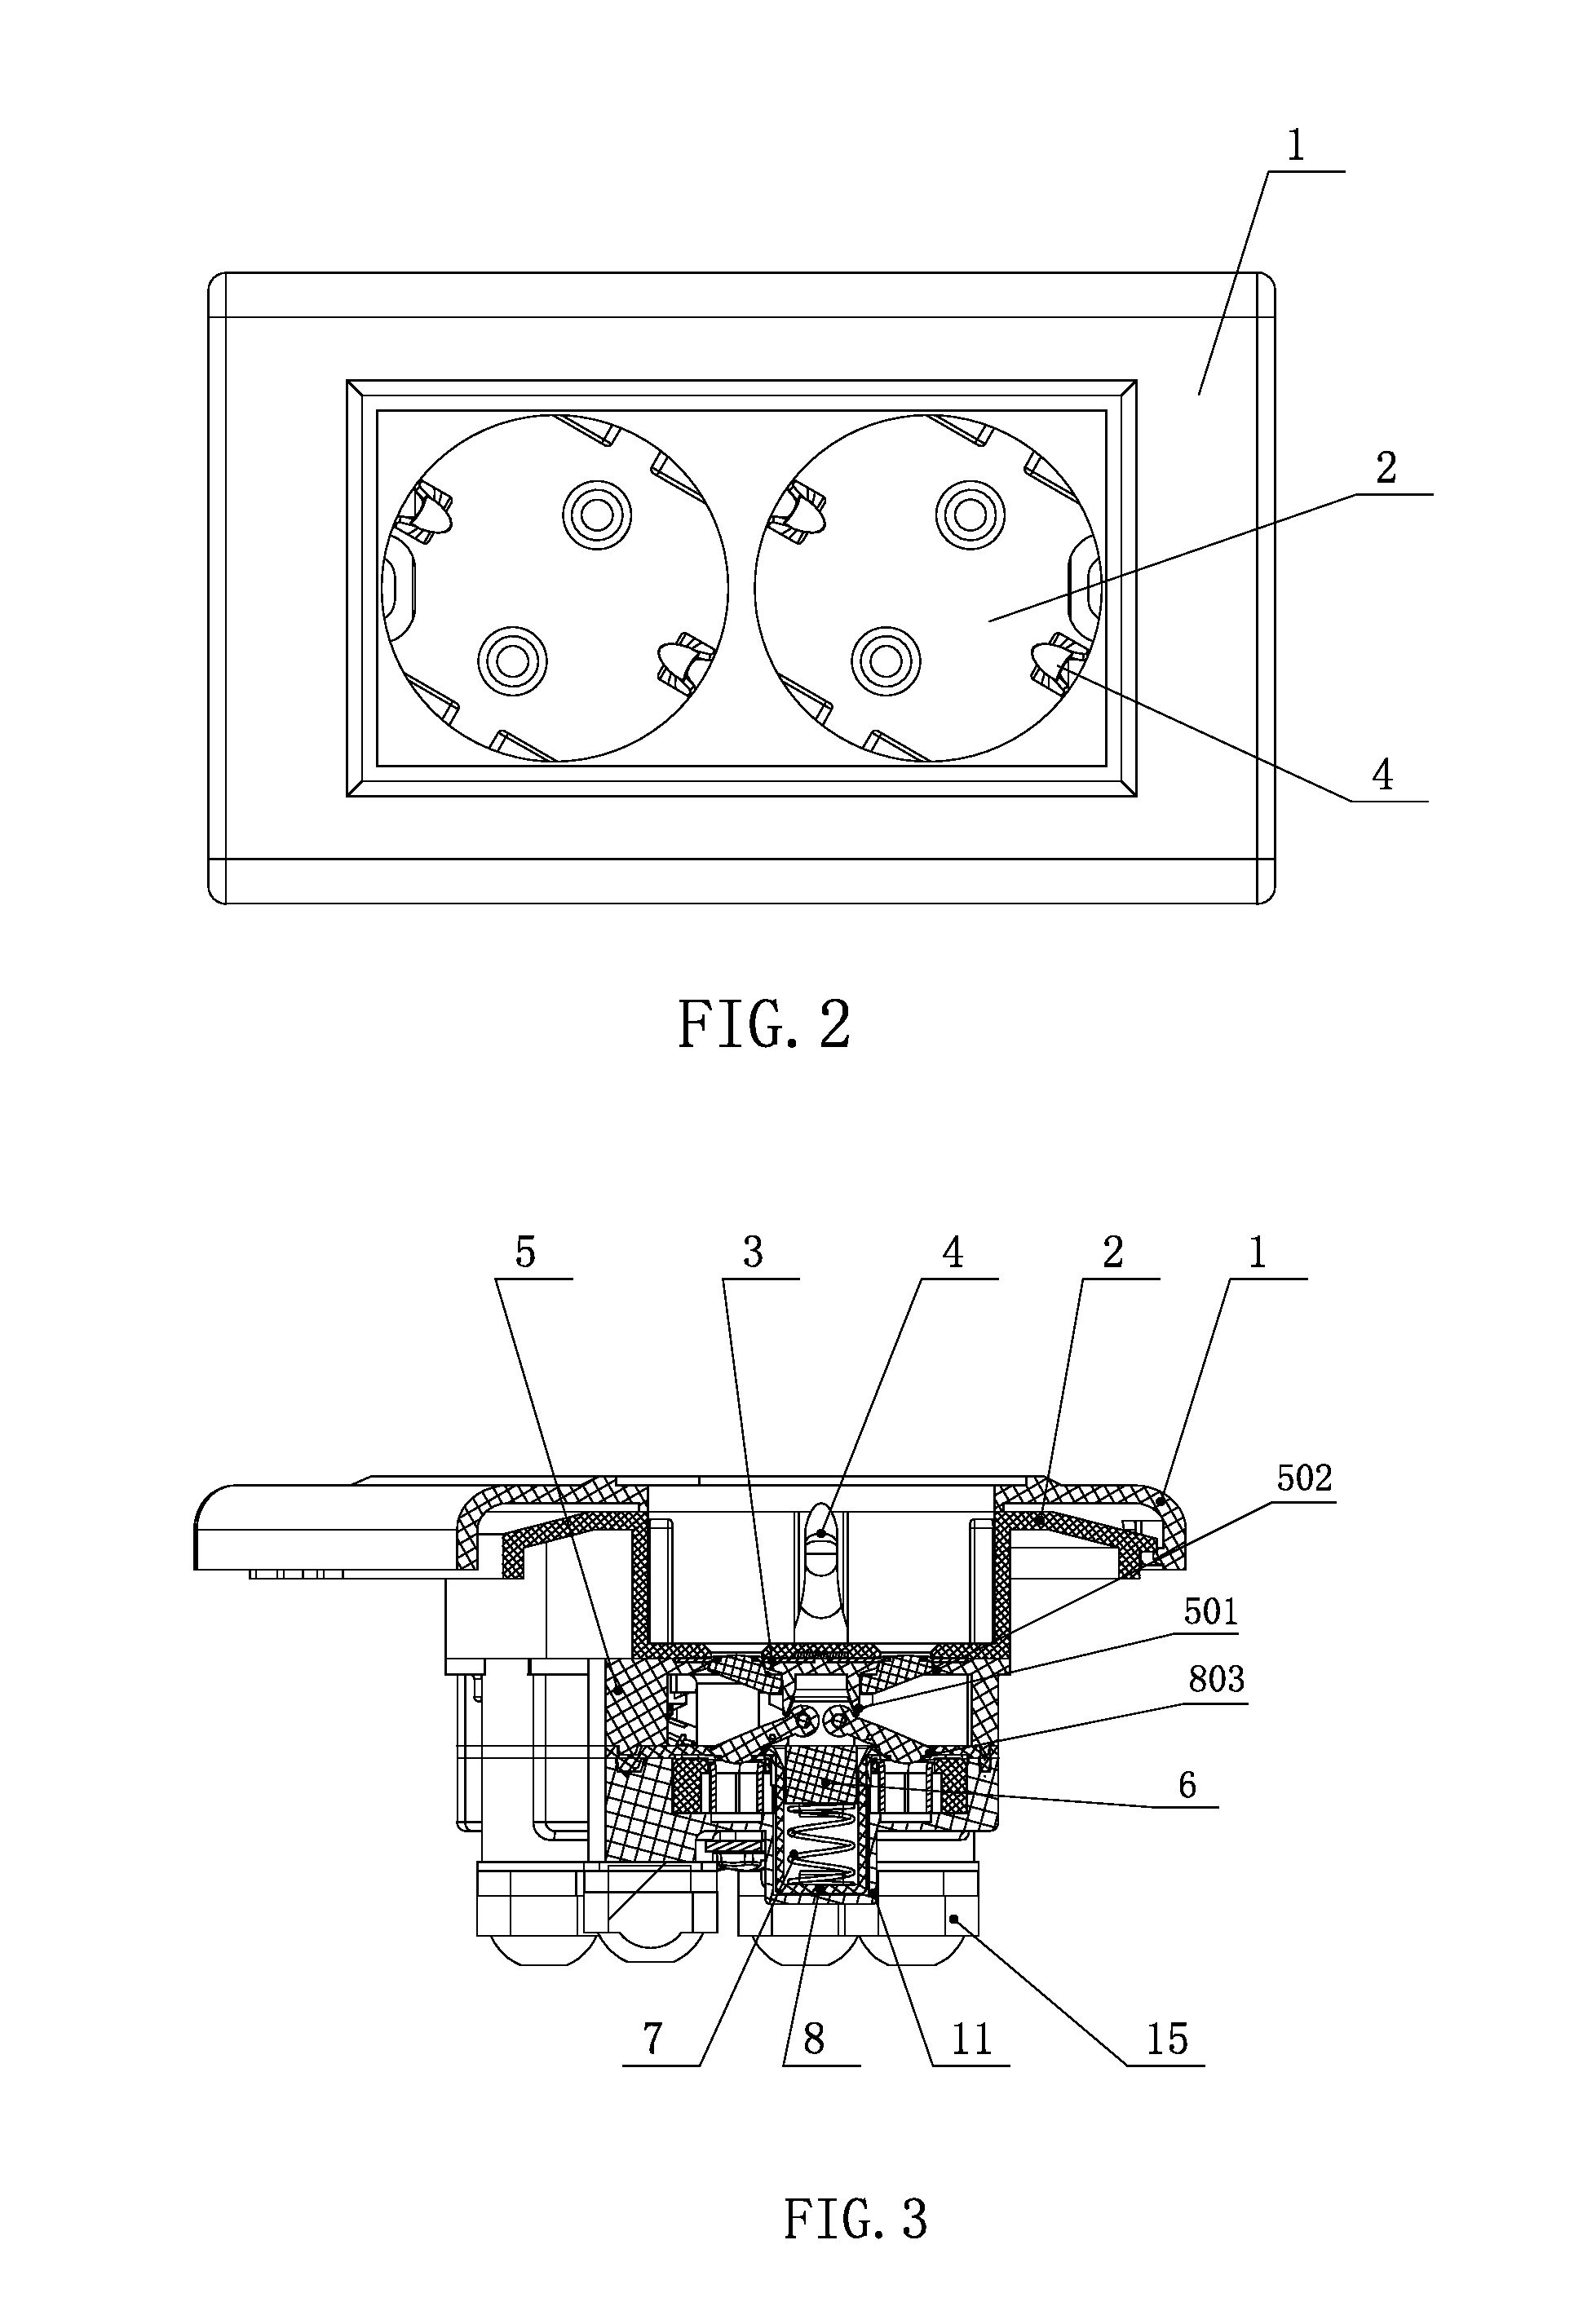 Waterproof socket having a waterproofing inner core movable between usage and non-usage positions